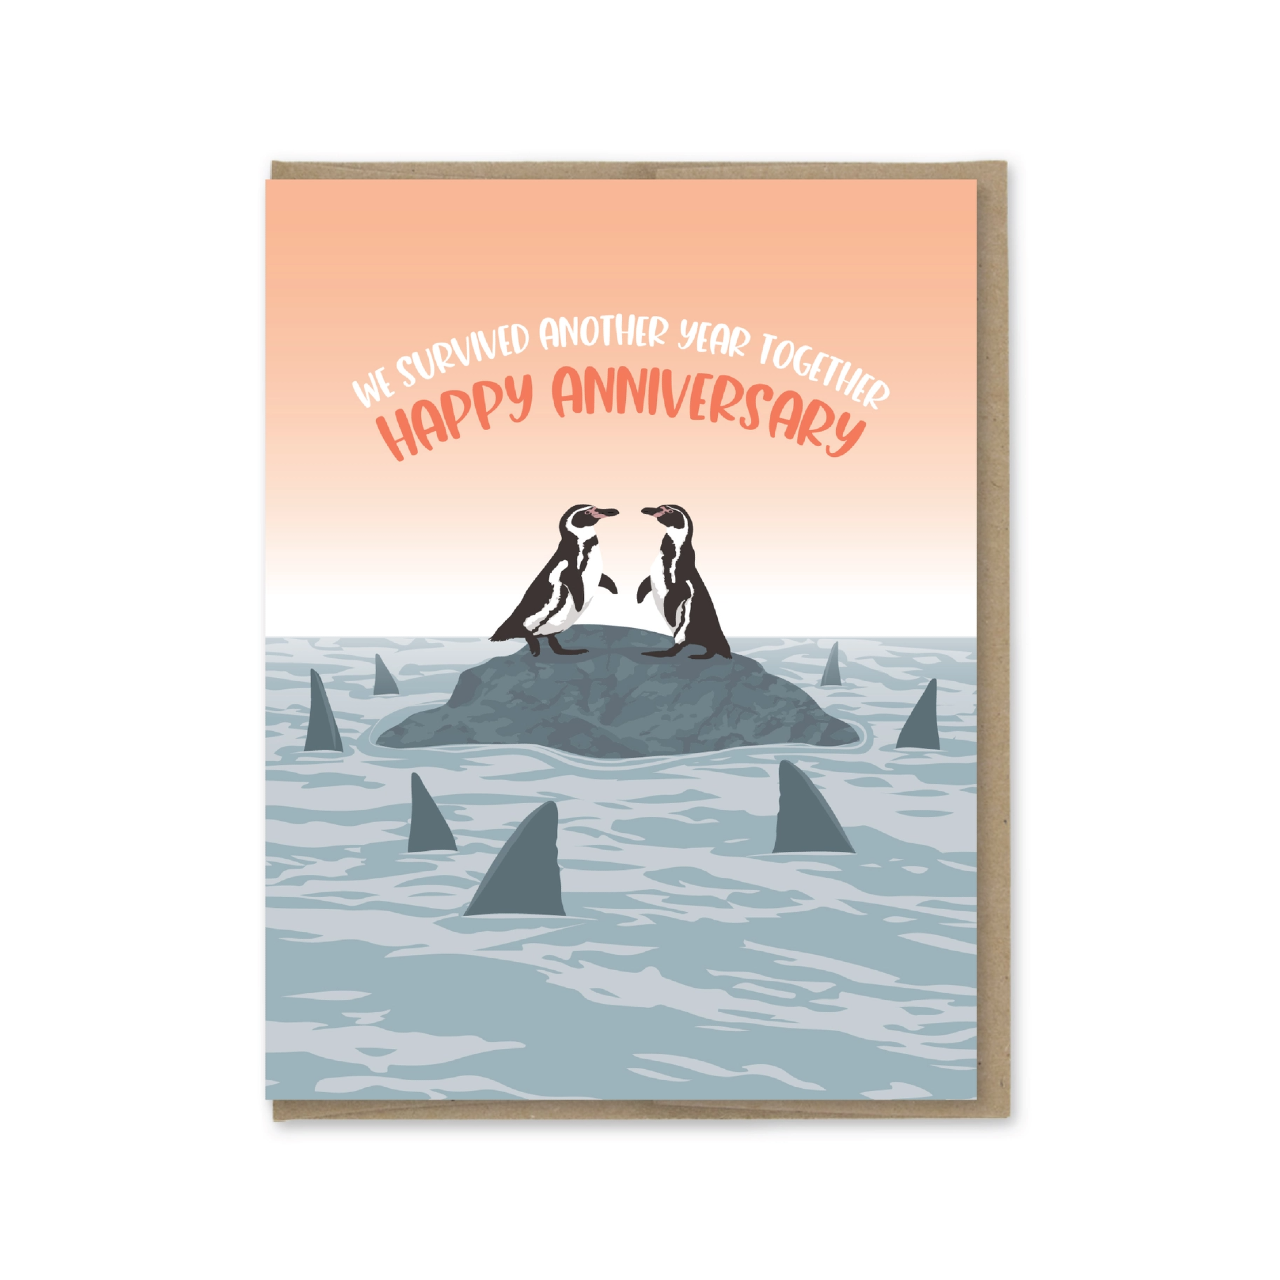 Survived Another Year Anniversary Card